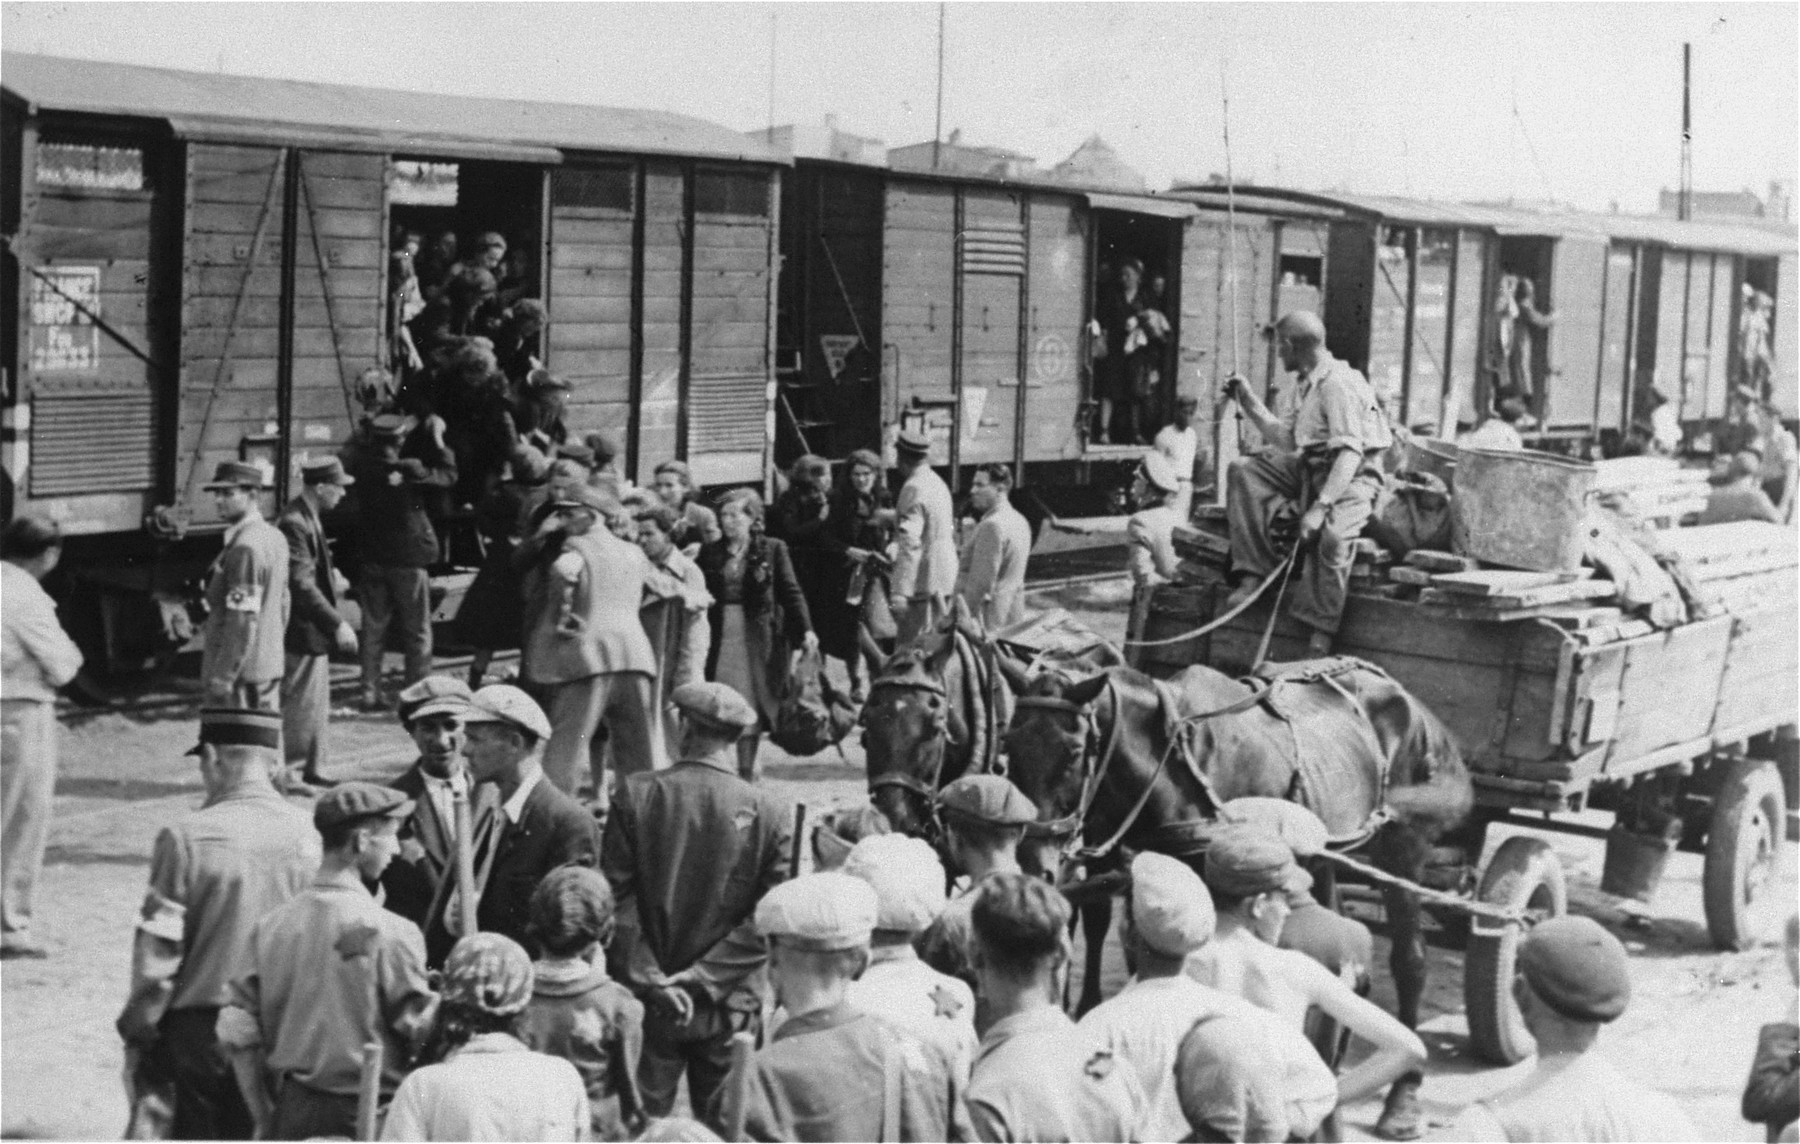 Jews from the Lodz ghetto board deportation trains for the Chelmno death camp.